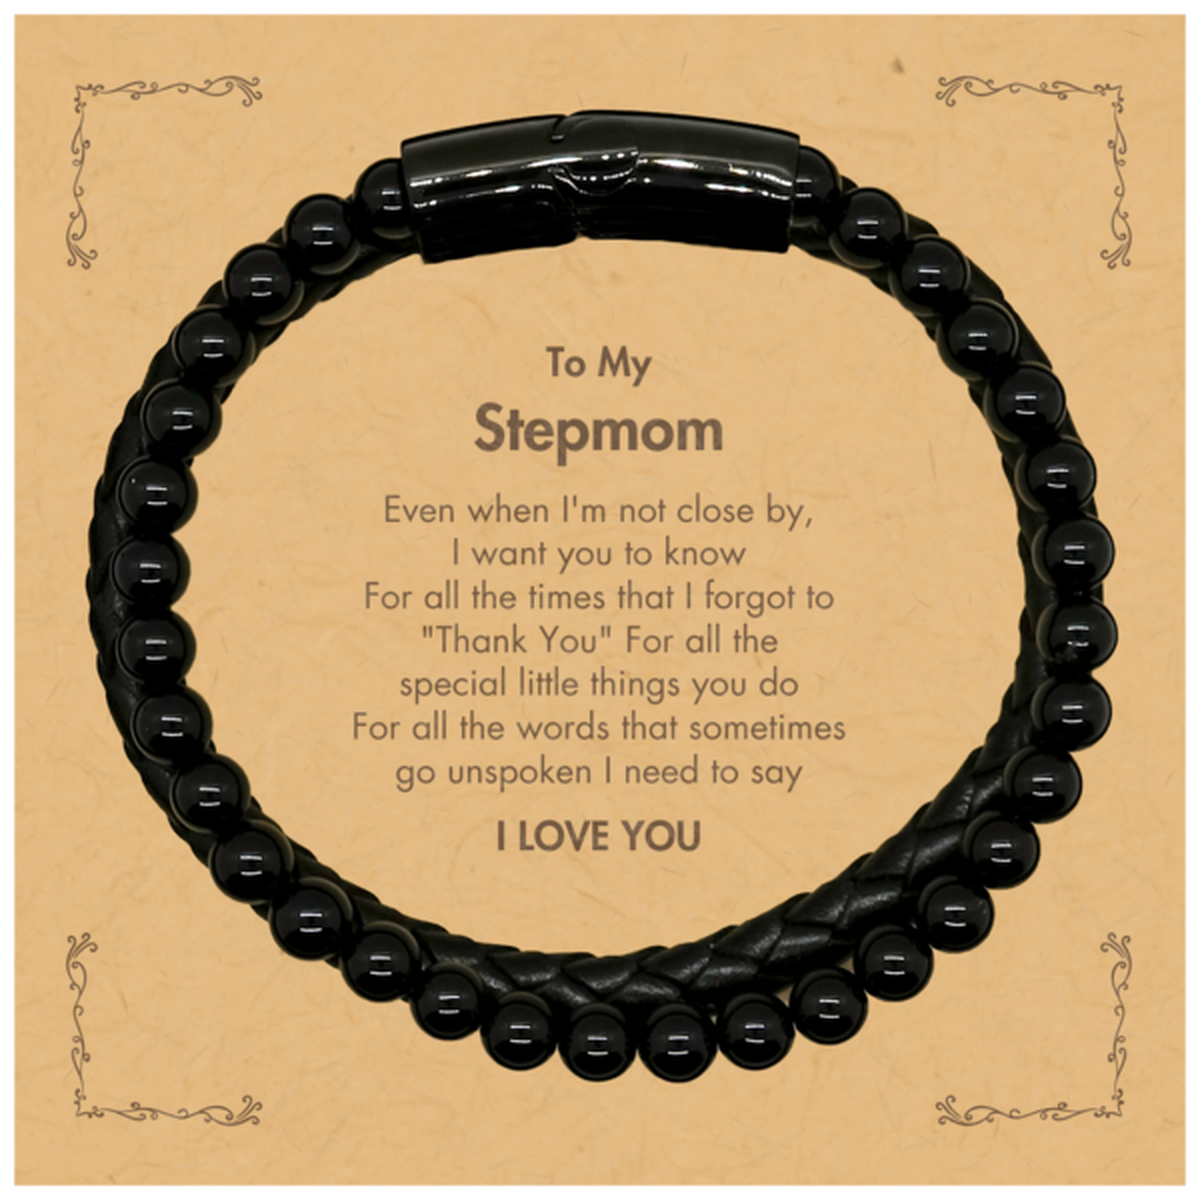 Thank You Gifts for Stepmom, Keepsake Stone Leather Bracelets Gifts for Stepmom Birthday Mother's day Father's Day Stepmom For all the words That sometimes go unspoken I need to say I LOVE YOU